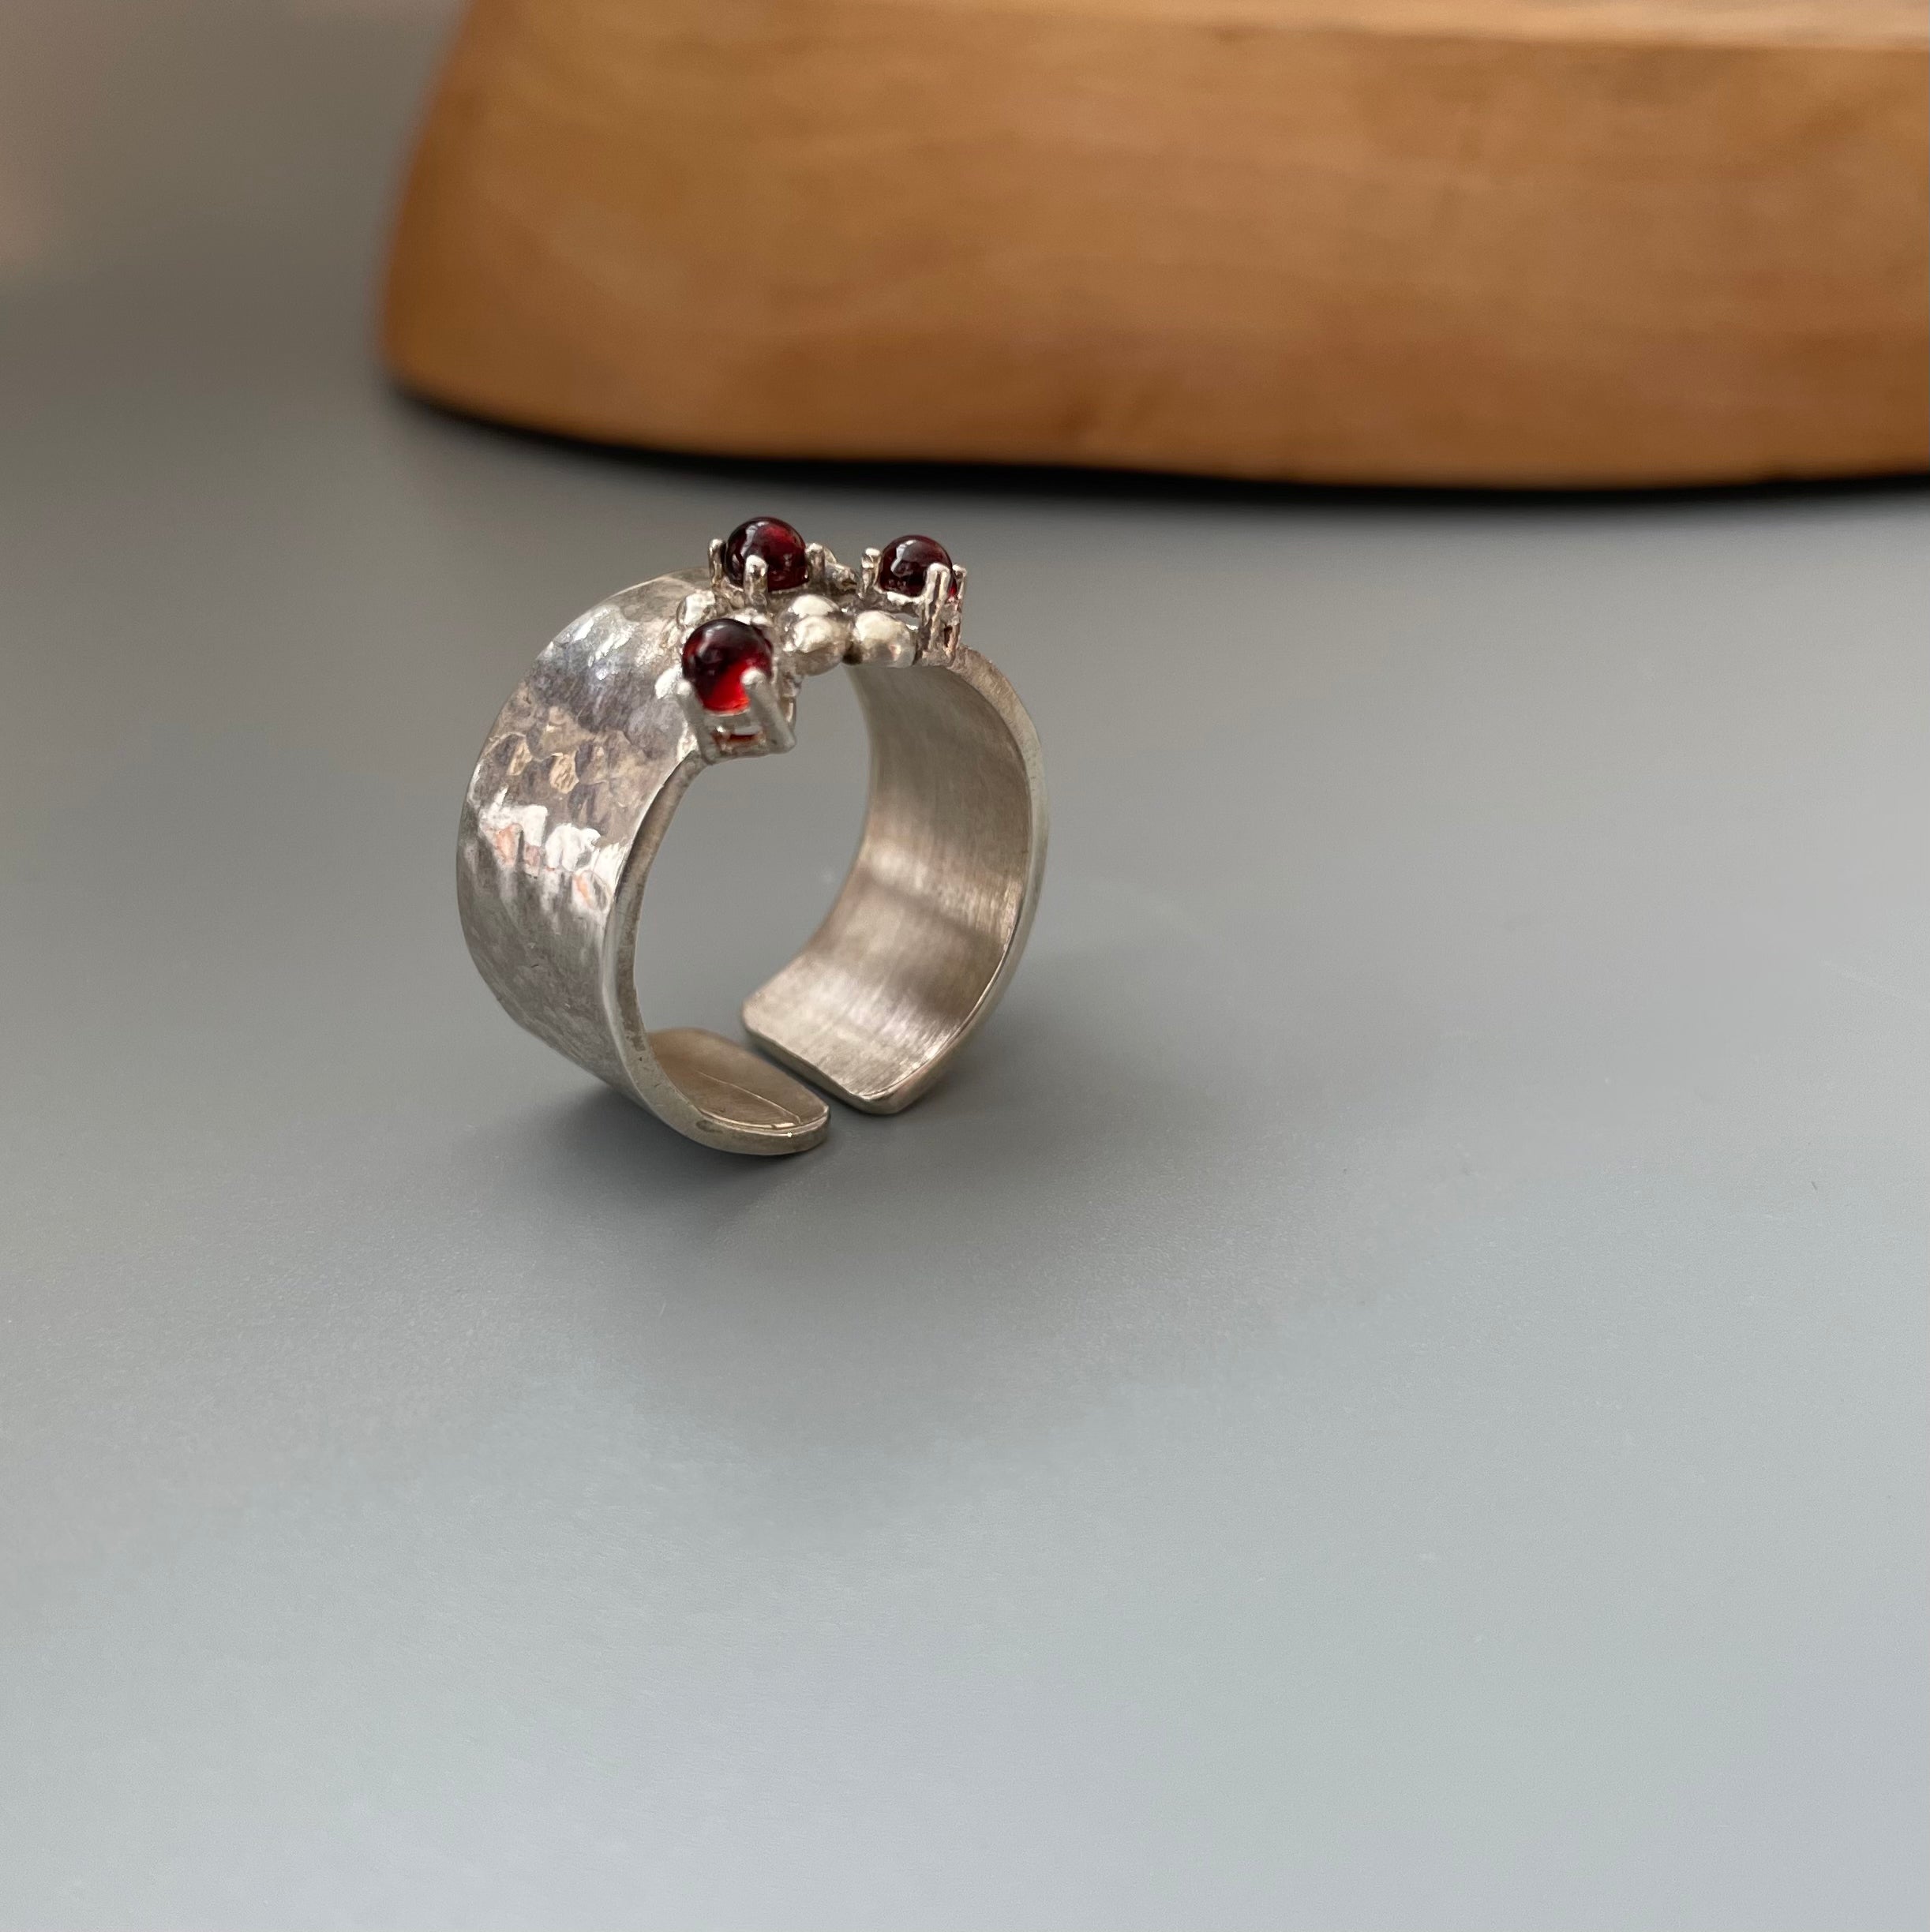 Persian Ring-Handmade Silver Ring with Garnet:Persian Jewelry-AFRA ART GALLERY